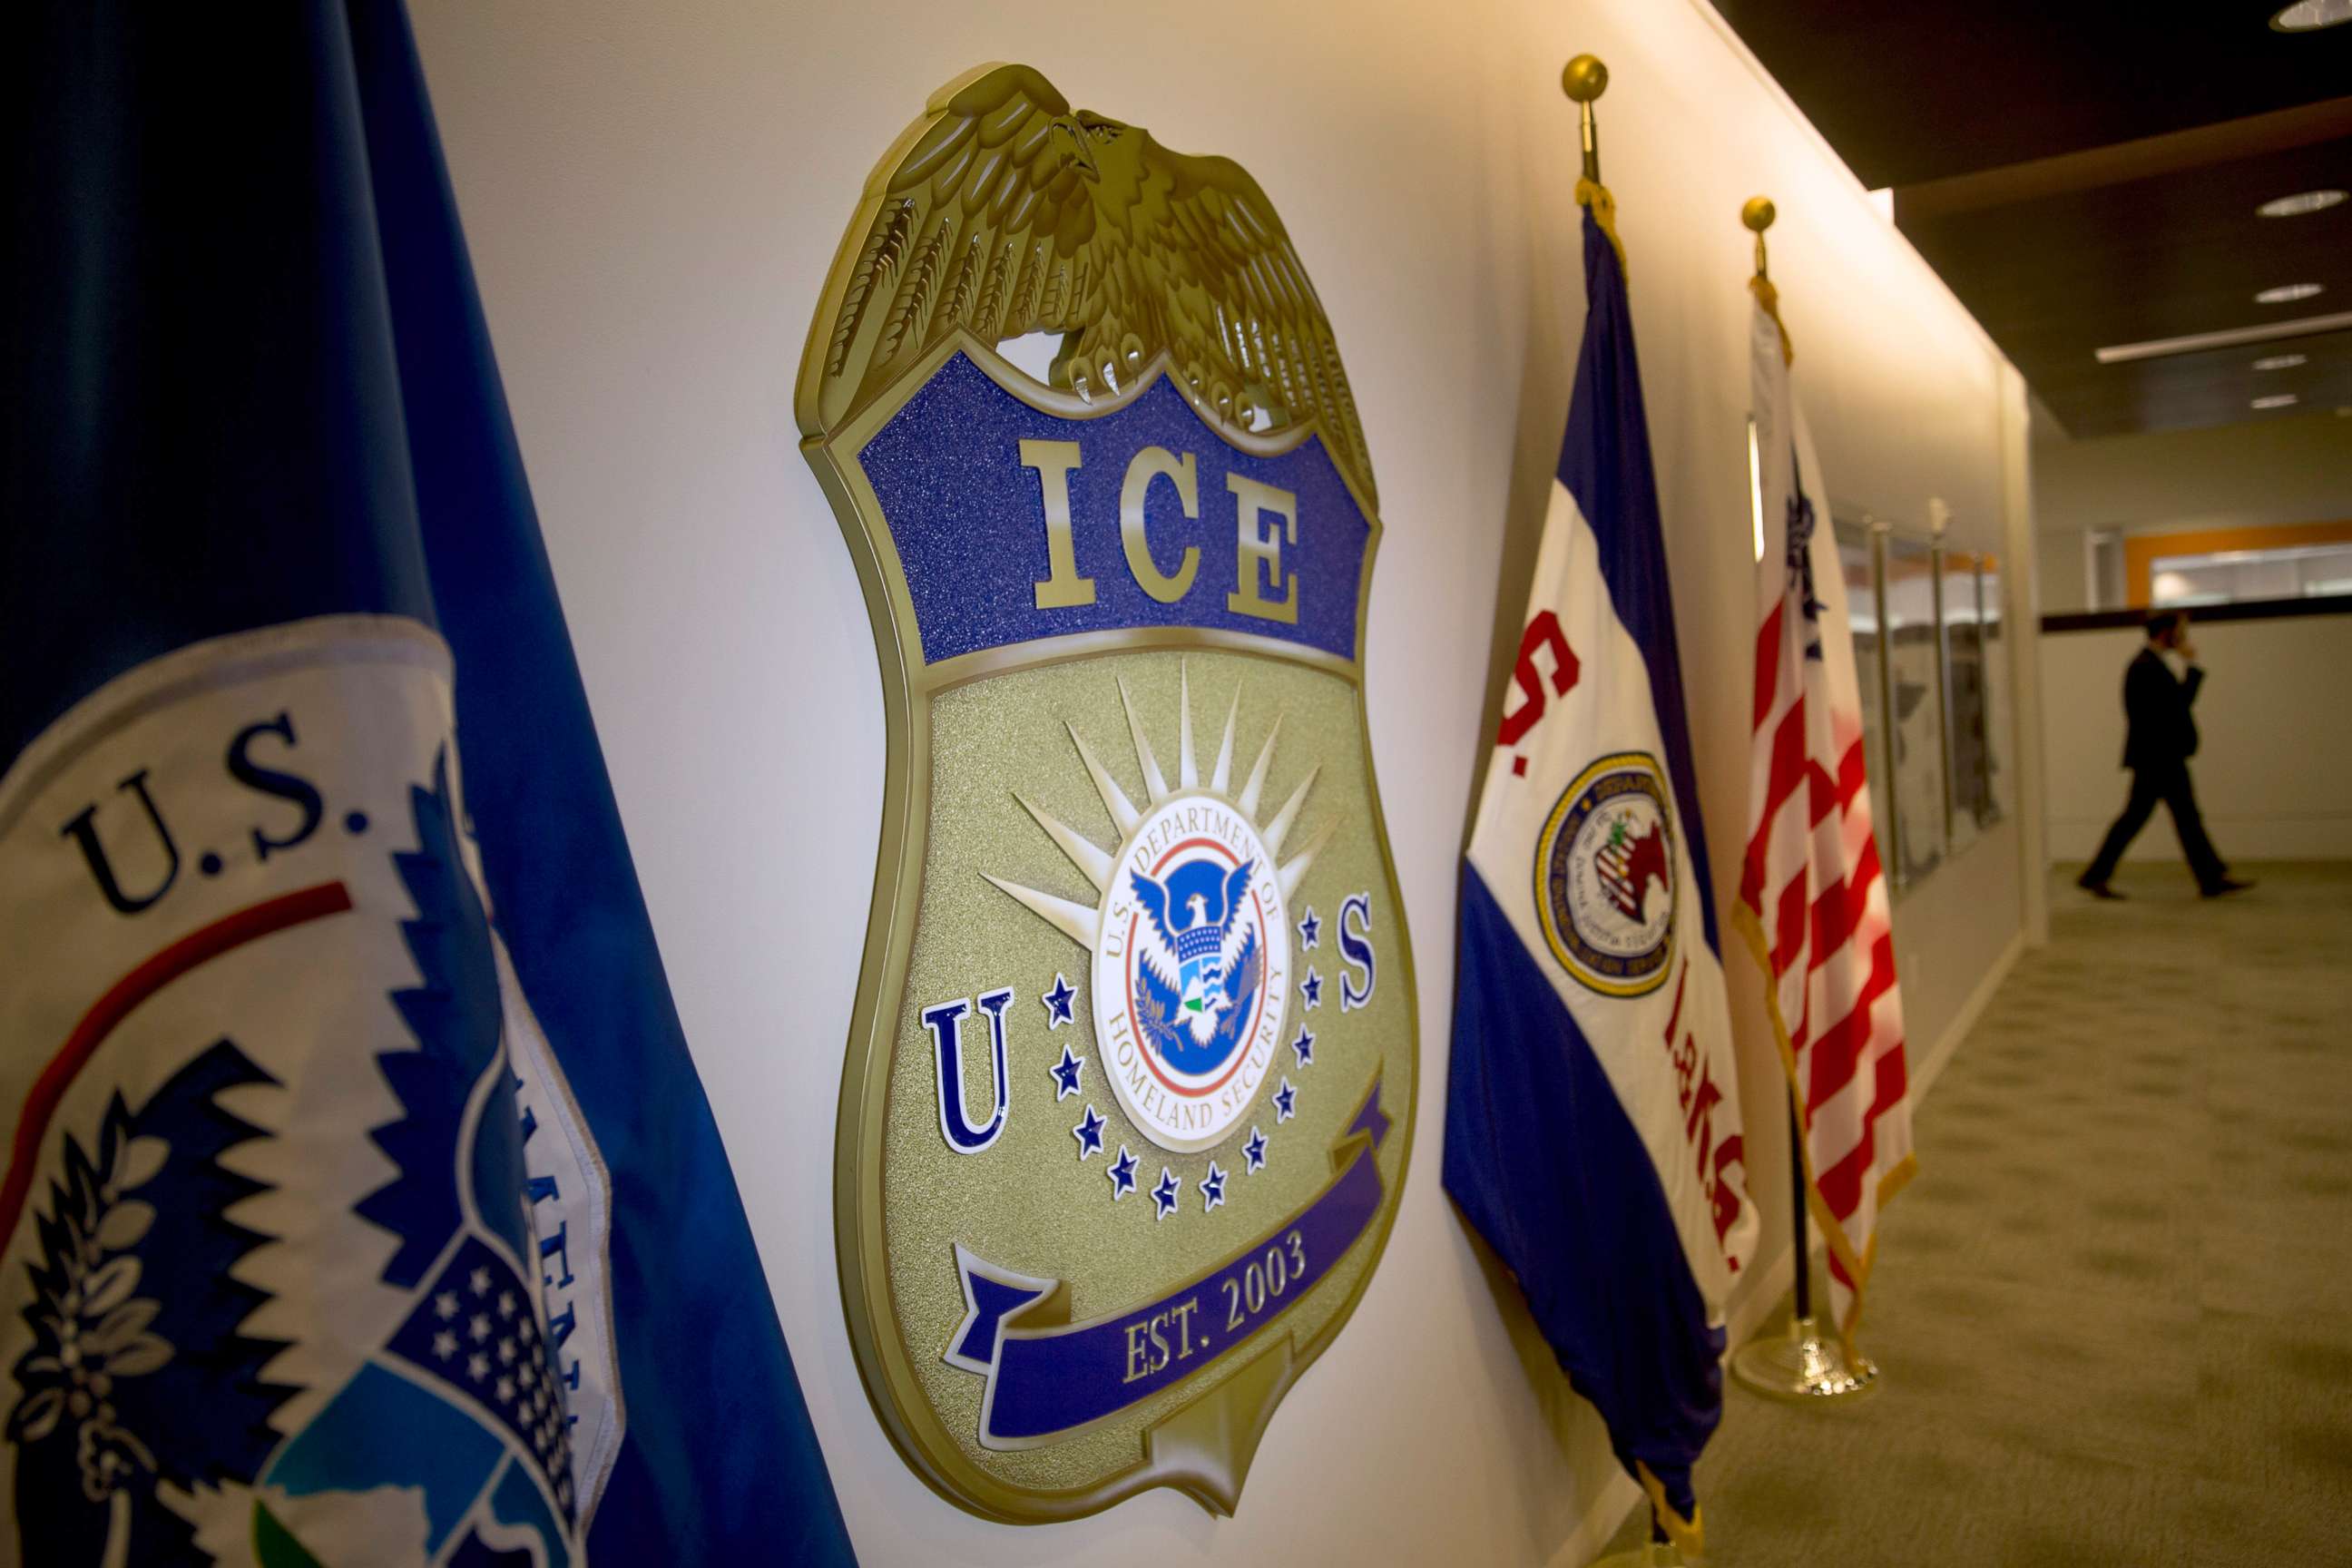 PHOTO: The U.S. Immigration and Customs Enforcement (ICE) seal hangs on a wall at the headquarters in Washington, D.C.